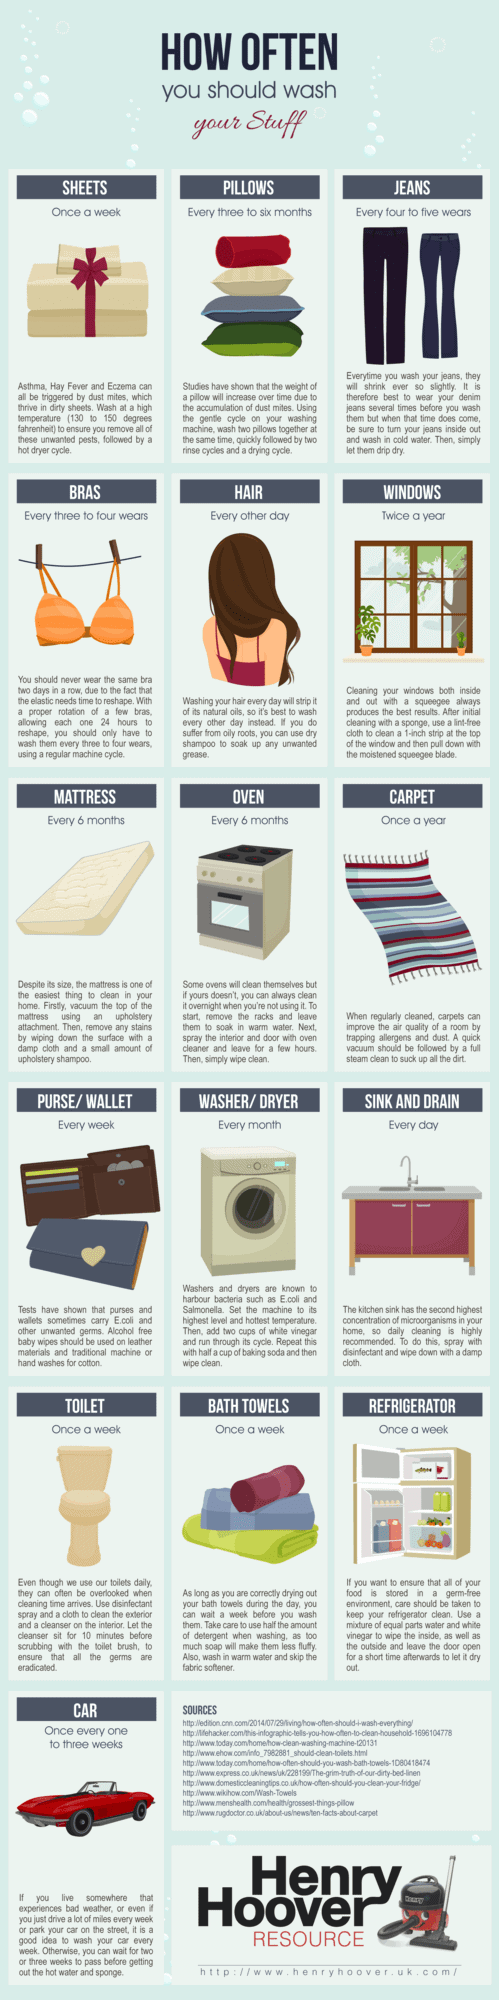 How often to wash things by Simple Most